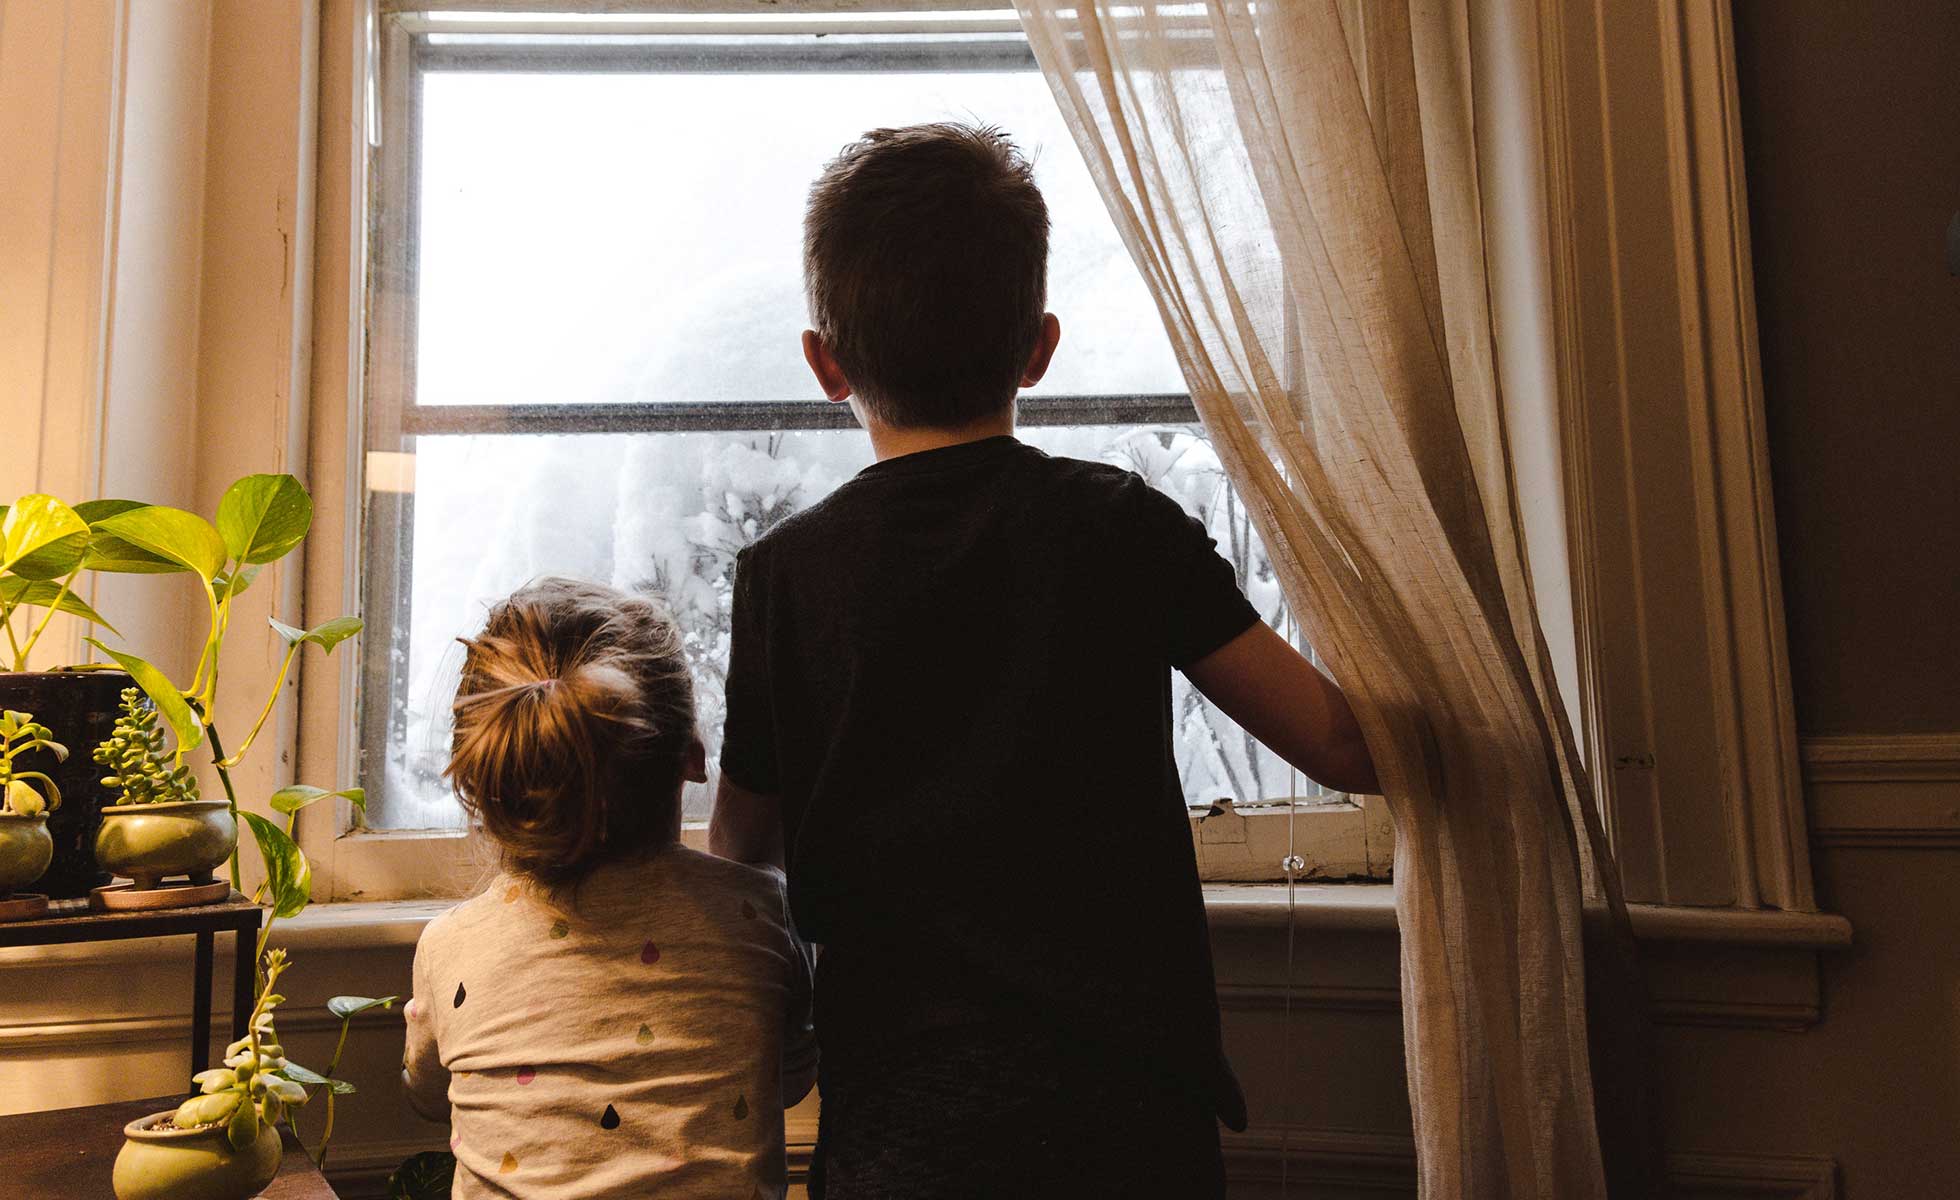 Children look out of a home window during winter